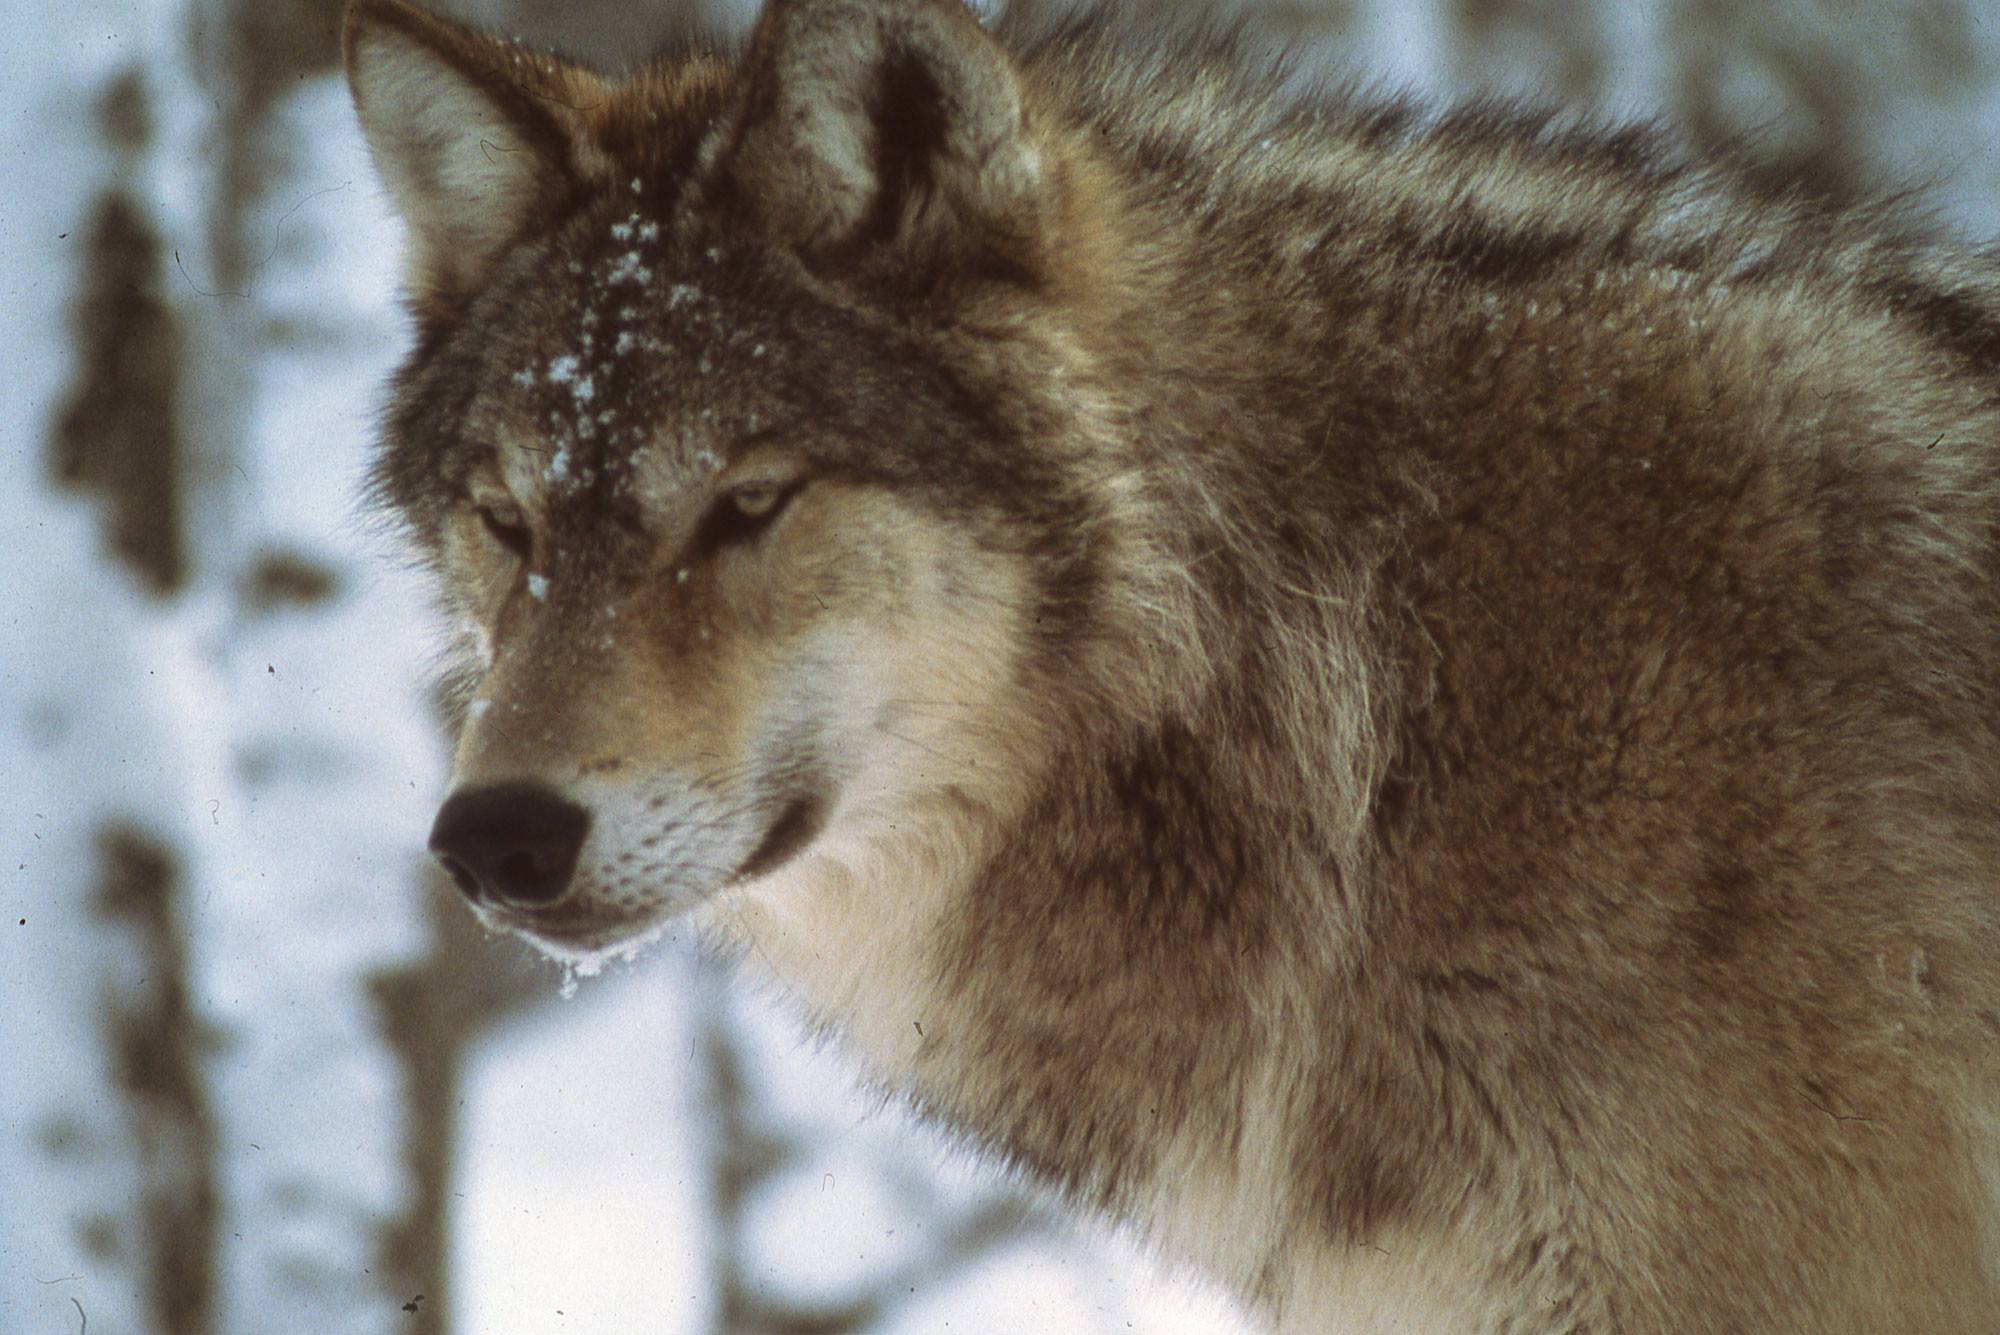 The NPS will introduce wolves at Isle Royale to fulfill the function of the apex predator. Over a three to five year period, the NPS will introduce between 20-30 wolves on the island.